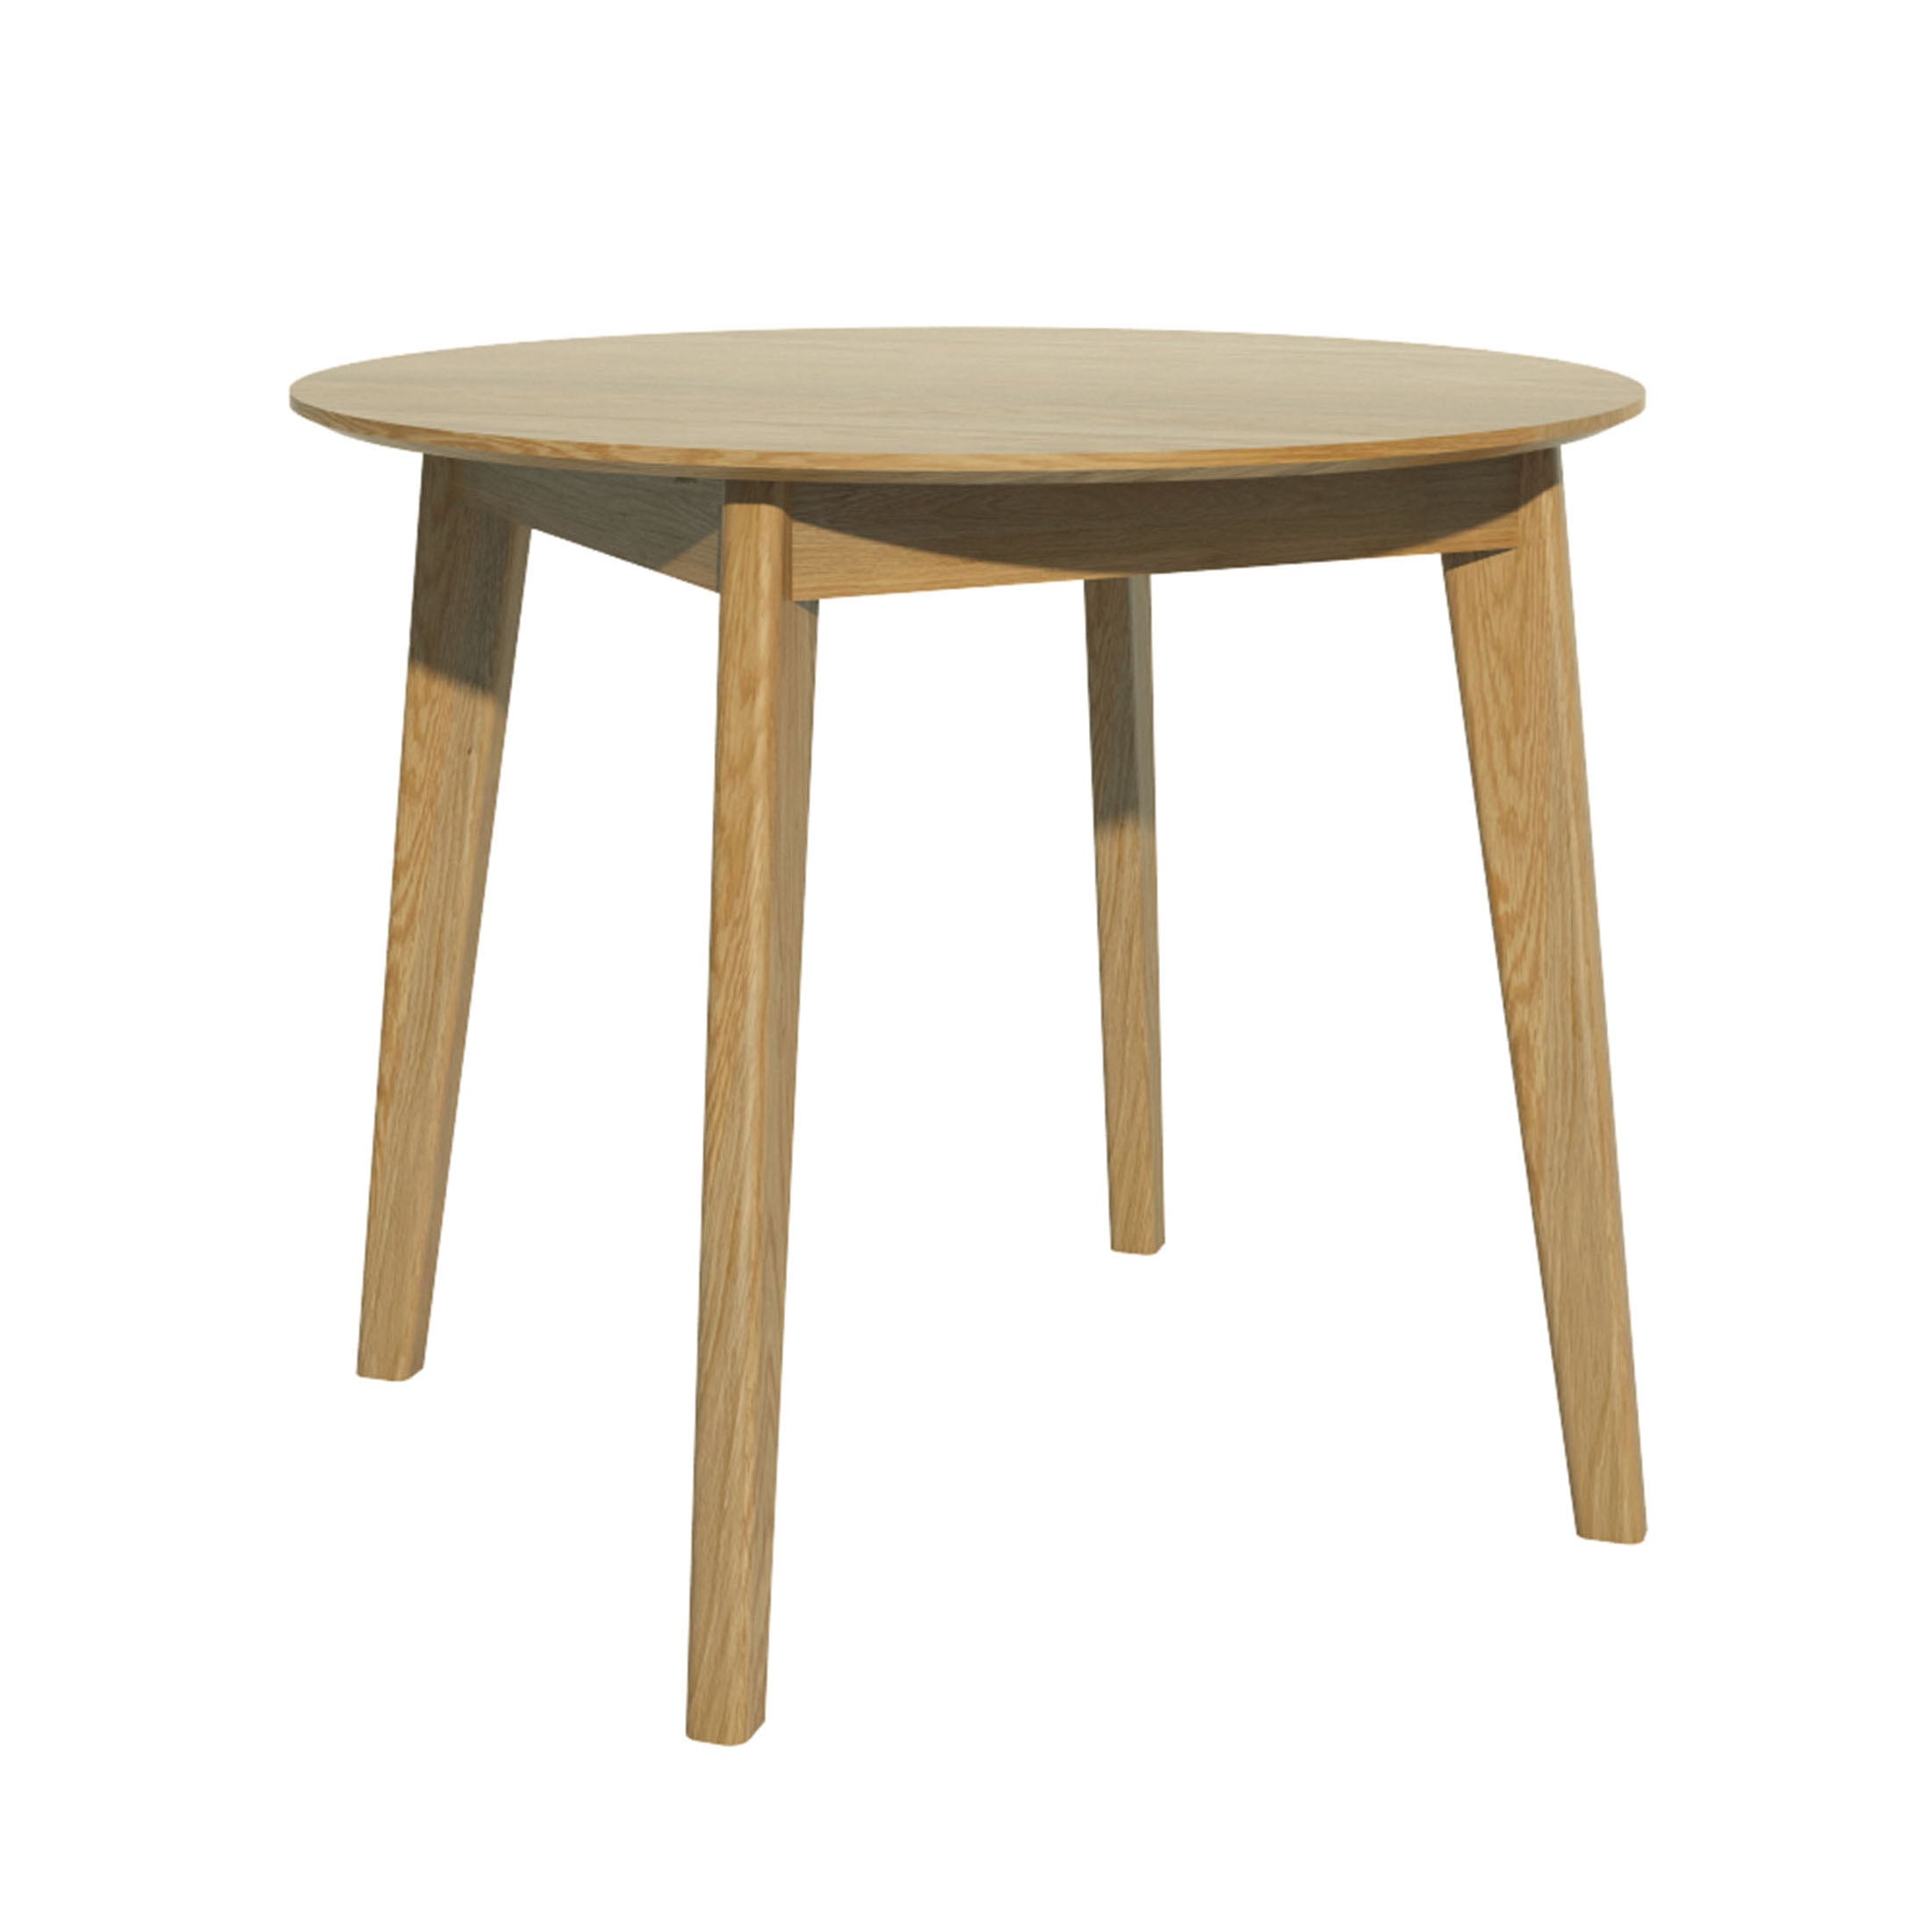 Nordic Oak round Dining Table from Top Secret Furniture